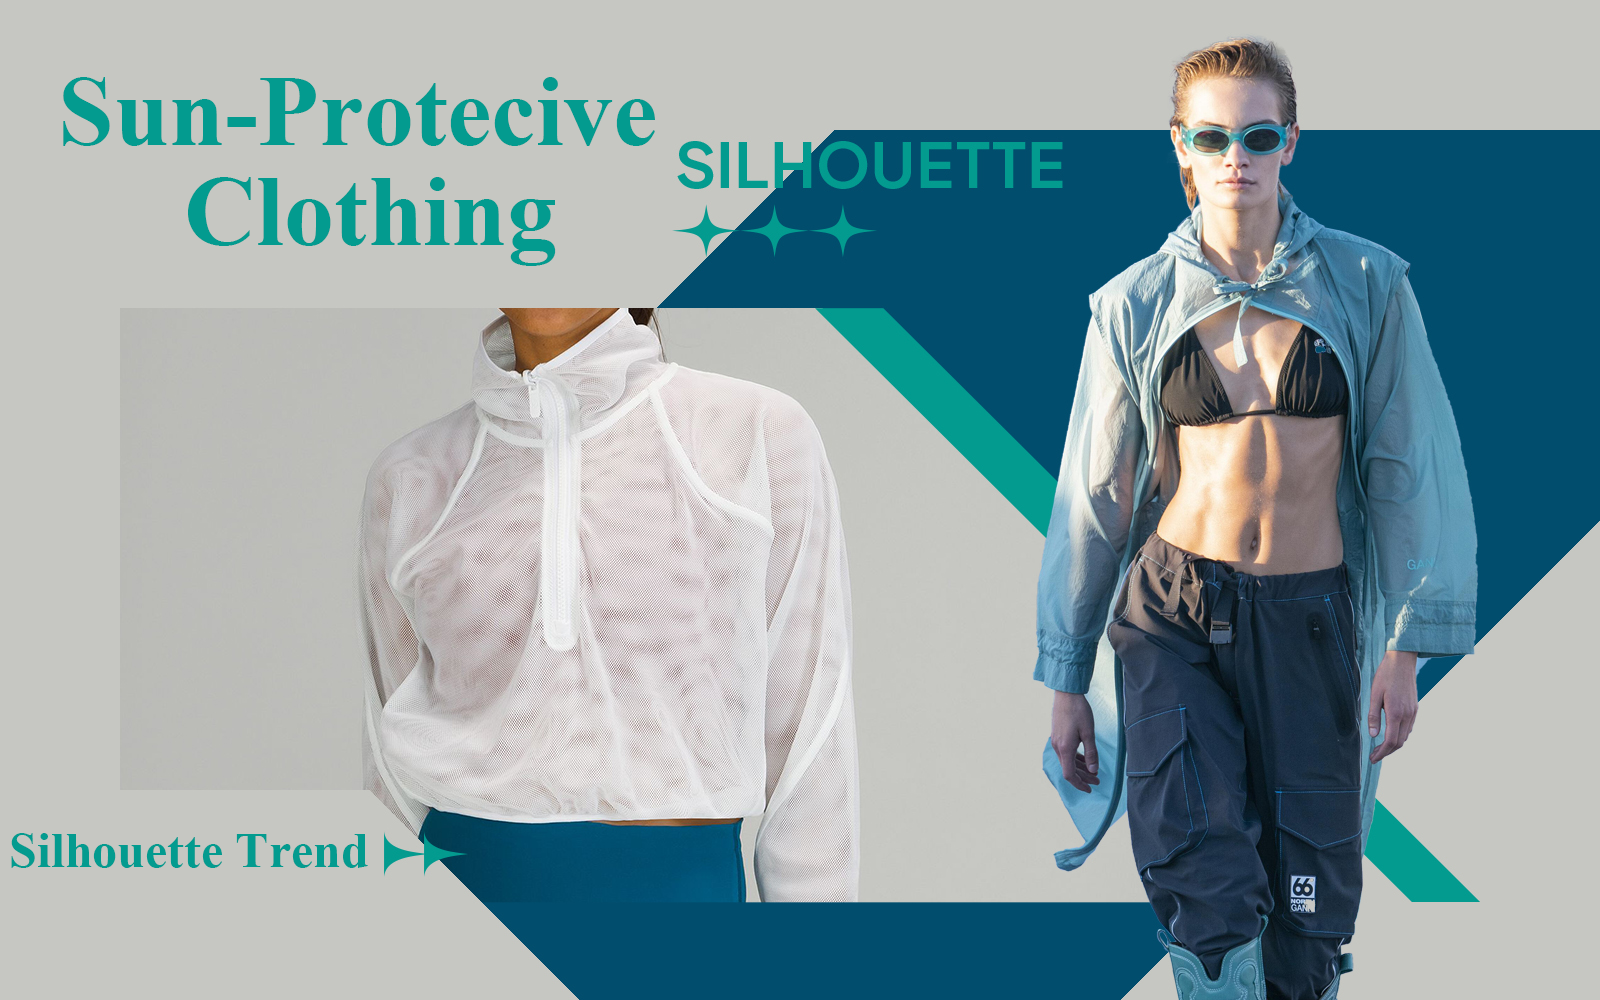 Summer Waves -- The Silhouette Trend for Women's Sun-protective Clothing